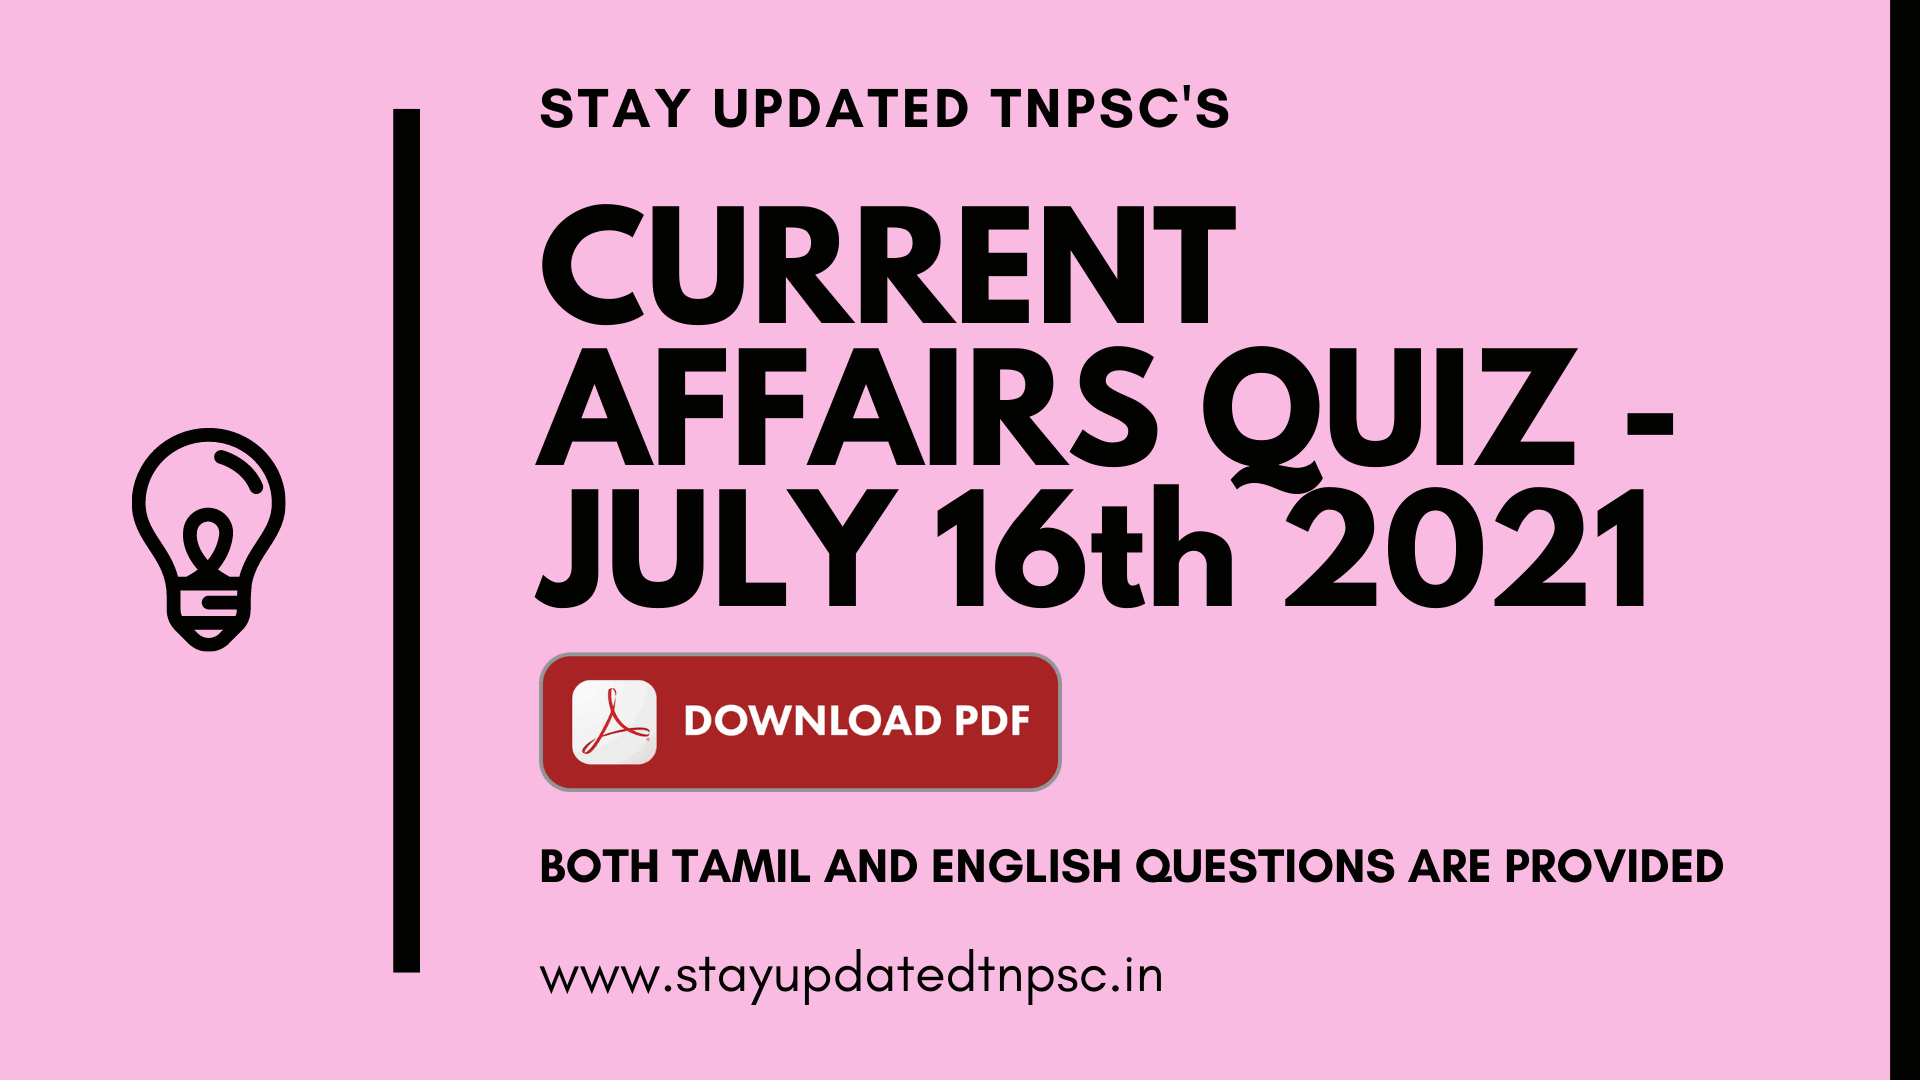 TNPSC DAILY CURRENT AFFAIRS: 16 JUNE 2021